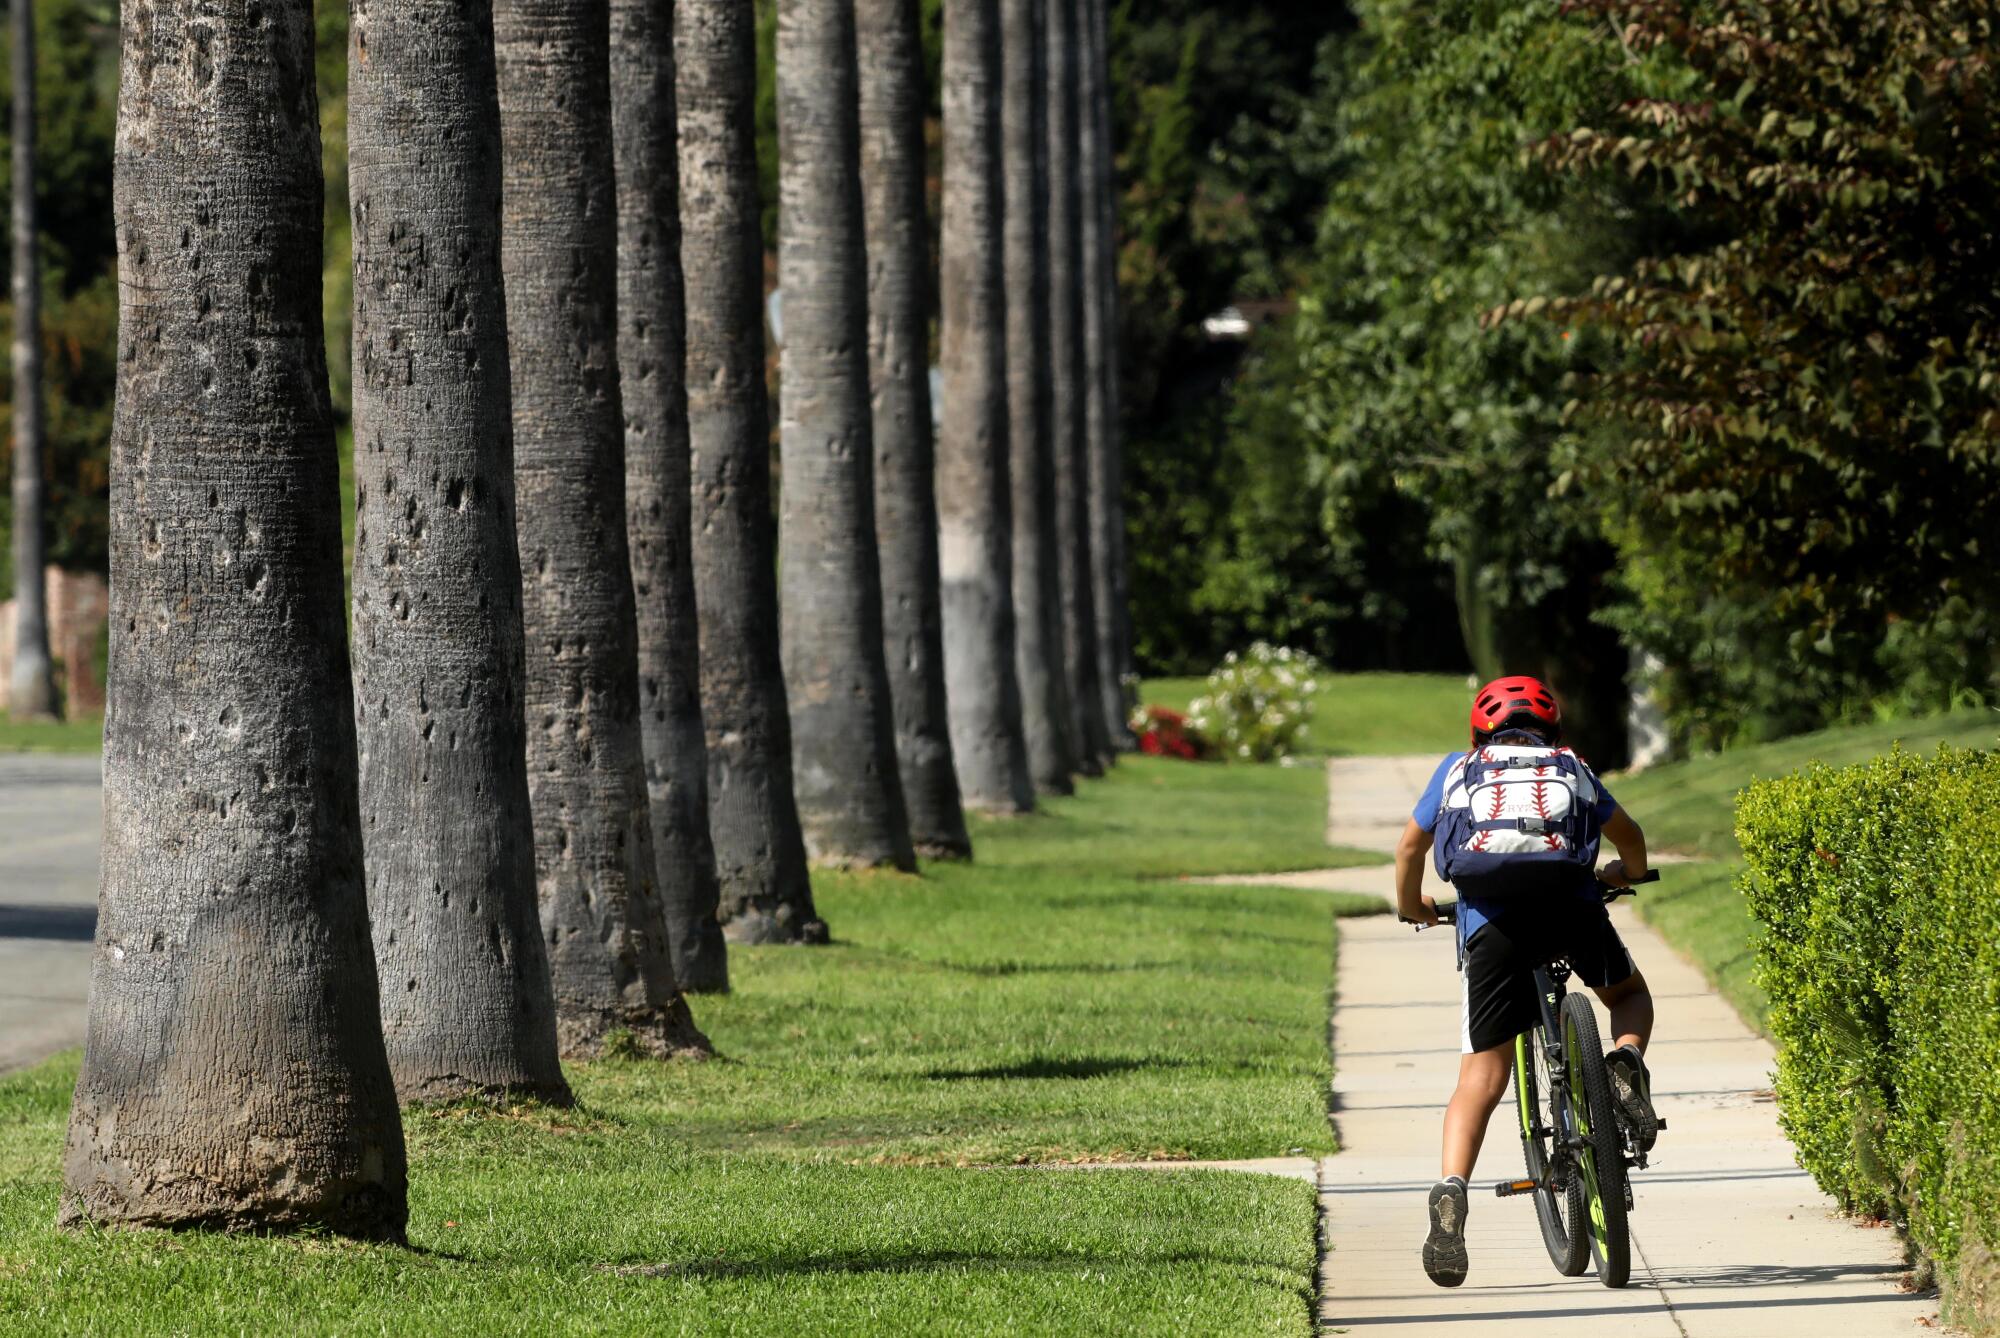 A young boy rides his bike past a row of palm trees.